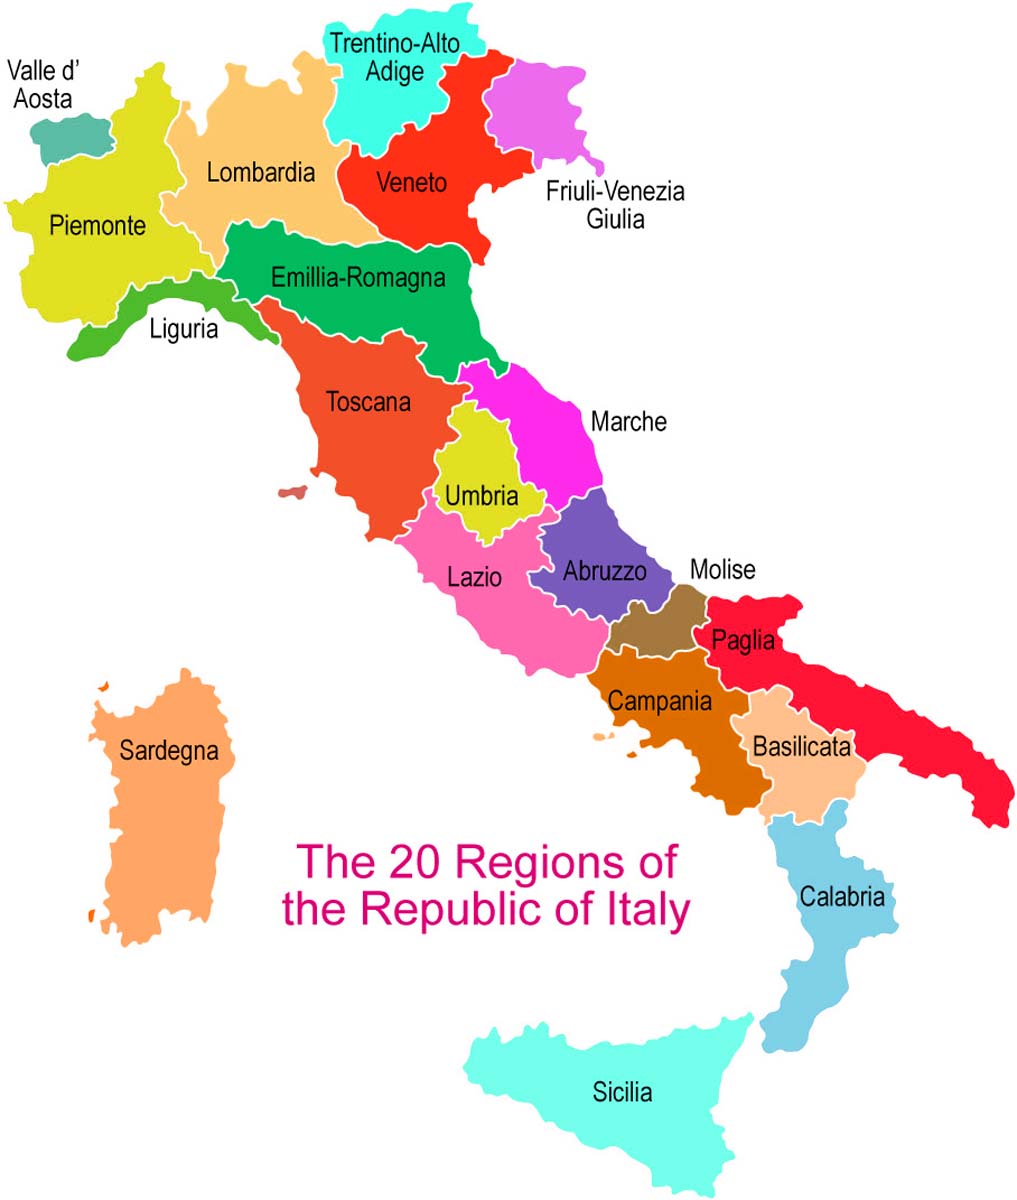 italy regions map - Travel Around The World - Vacation Reviews